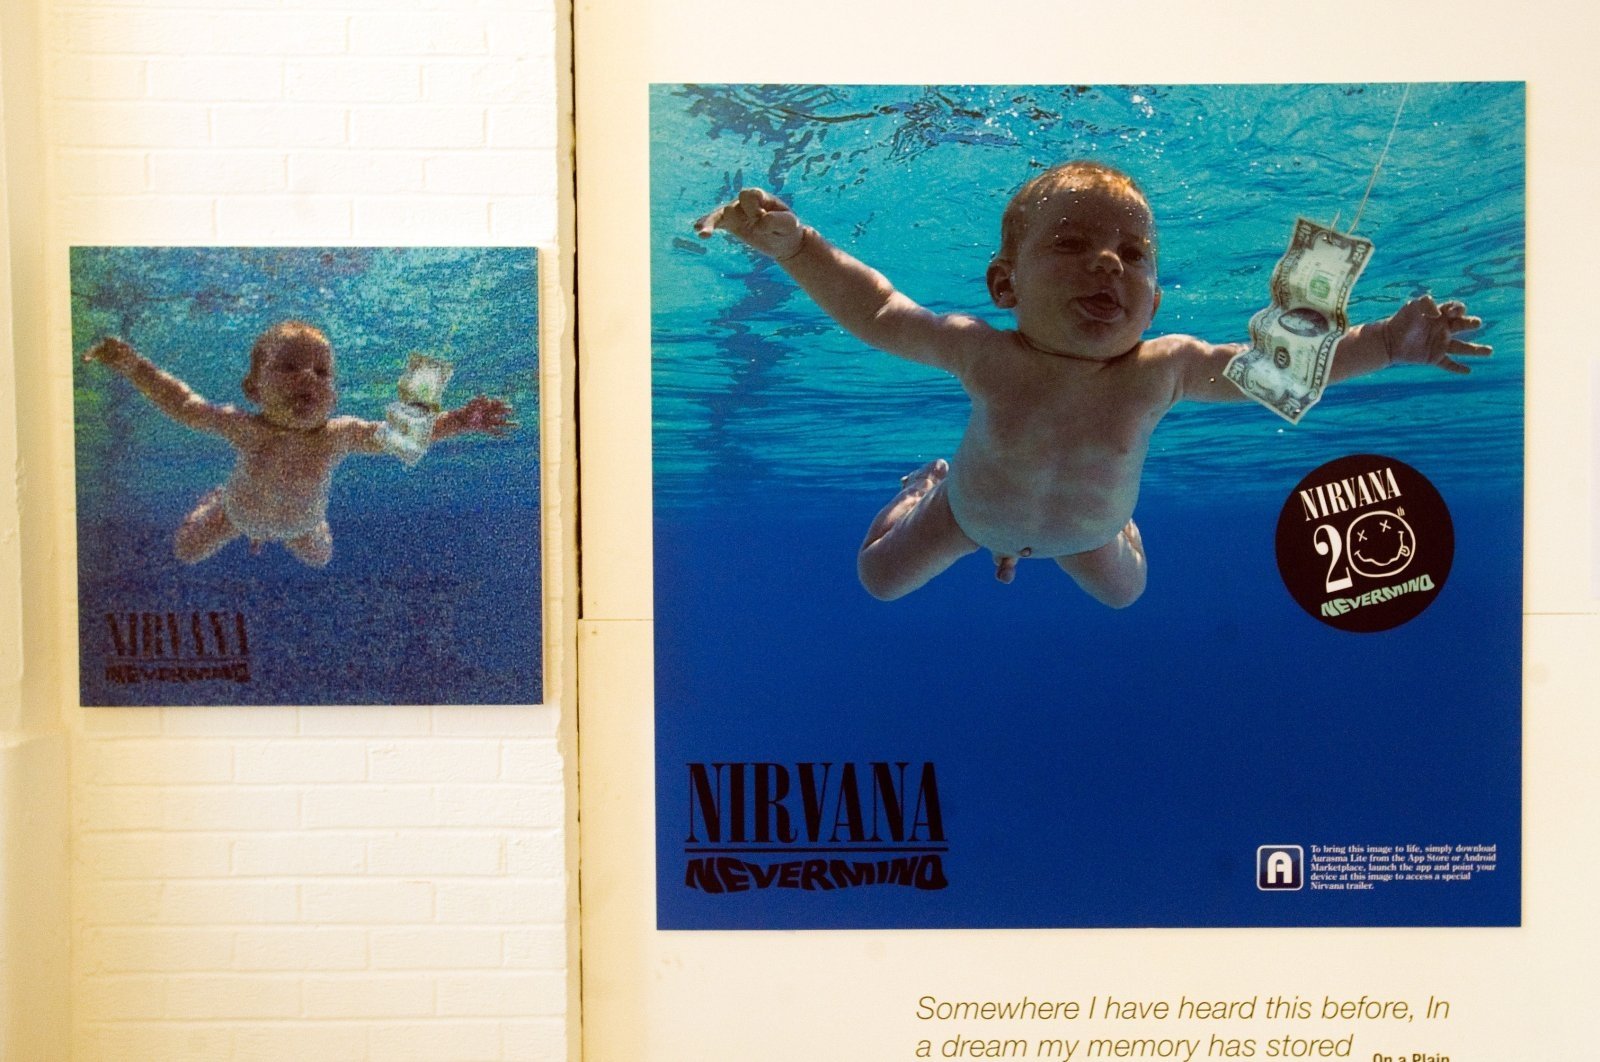 Nirvana artifacts and exhibits are seen at the opening of "In Bloom: The Nirvana Exhibition," marking the 20th anniversary of the release of Nirvana&#039;s "Nevermind" album, at the Loading Bay Gallery in London, England, Sept. 13, 2011. (Getty Images)